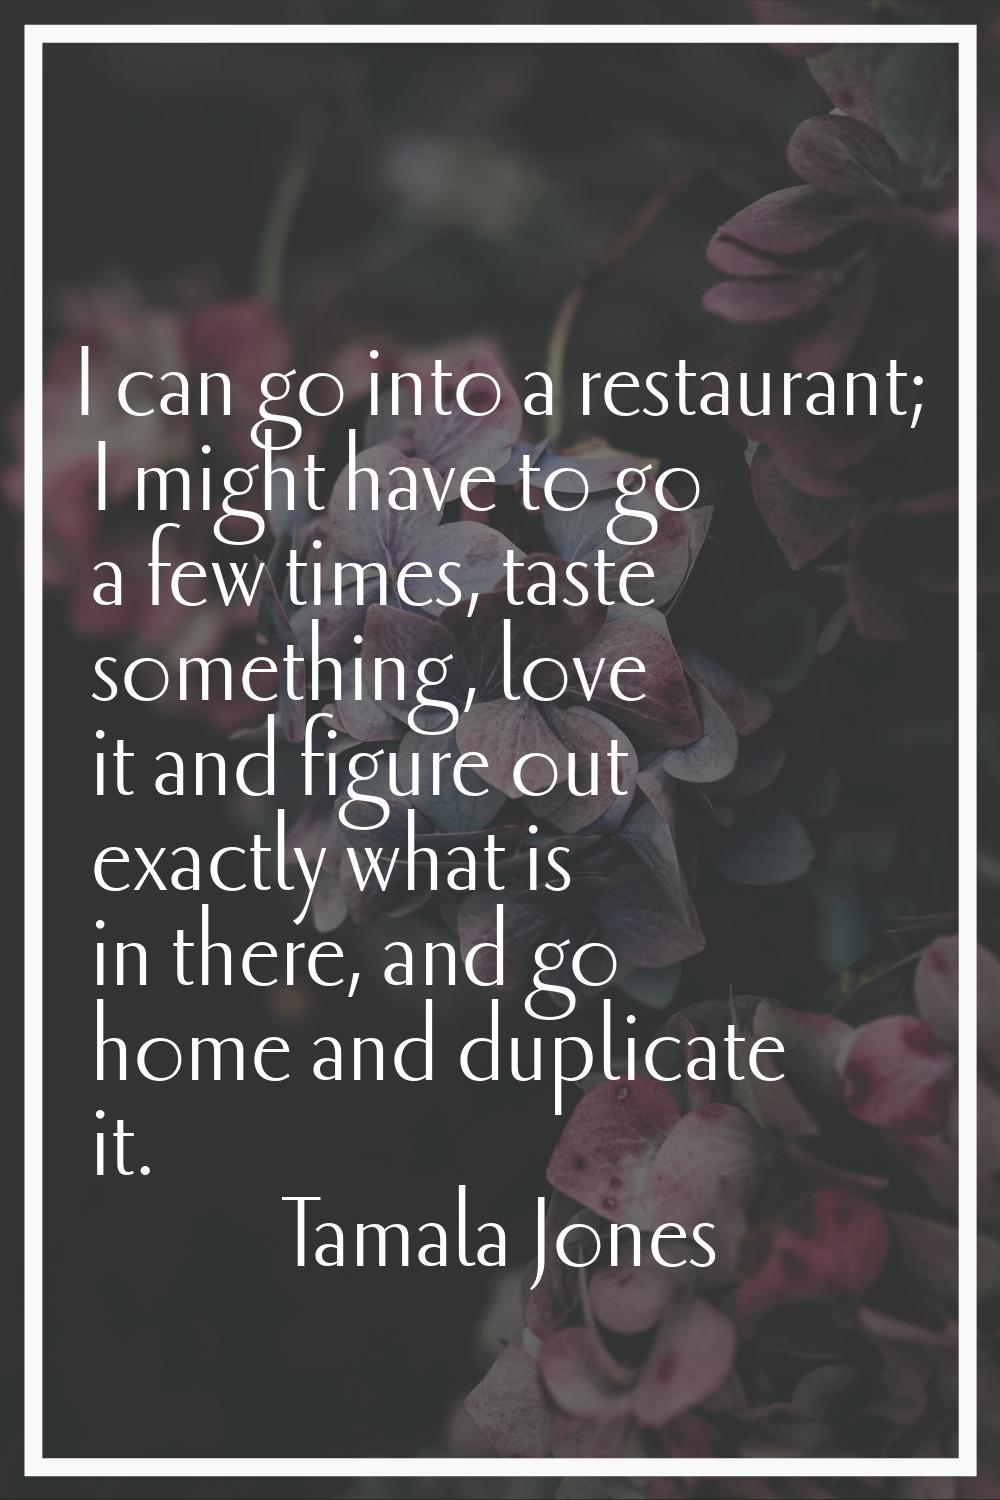 I can go into a restaurant; I might have to go a few times, taste something, love it and figure out